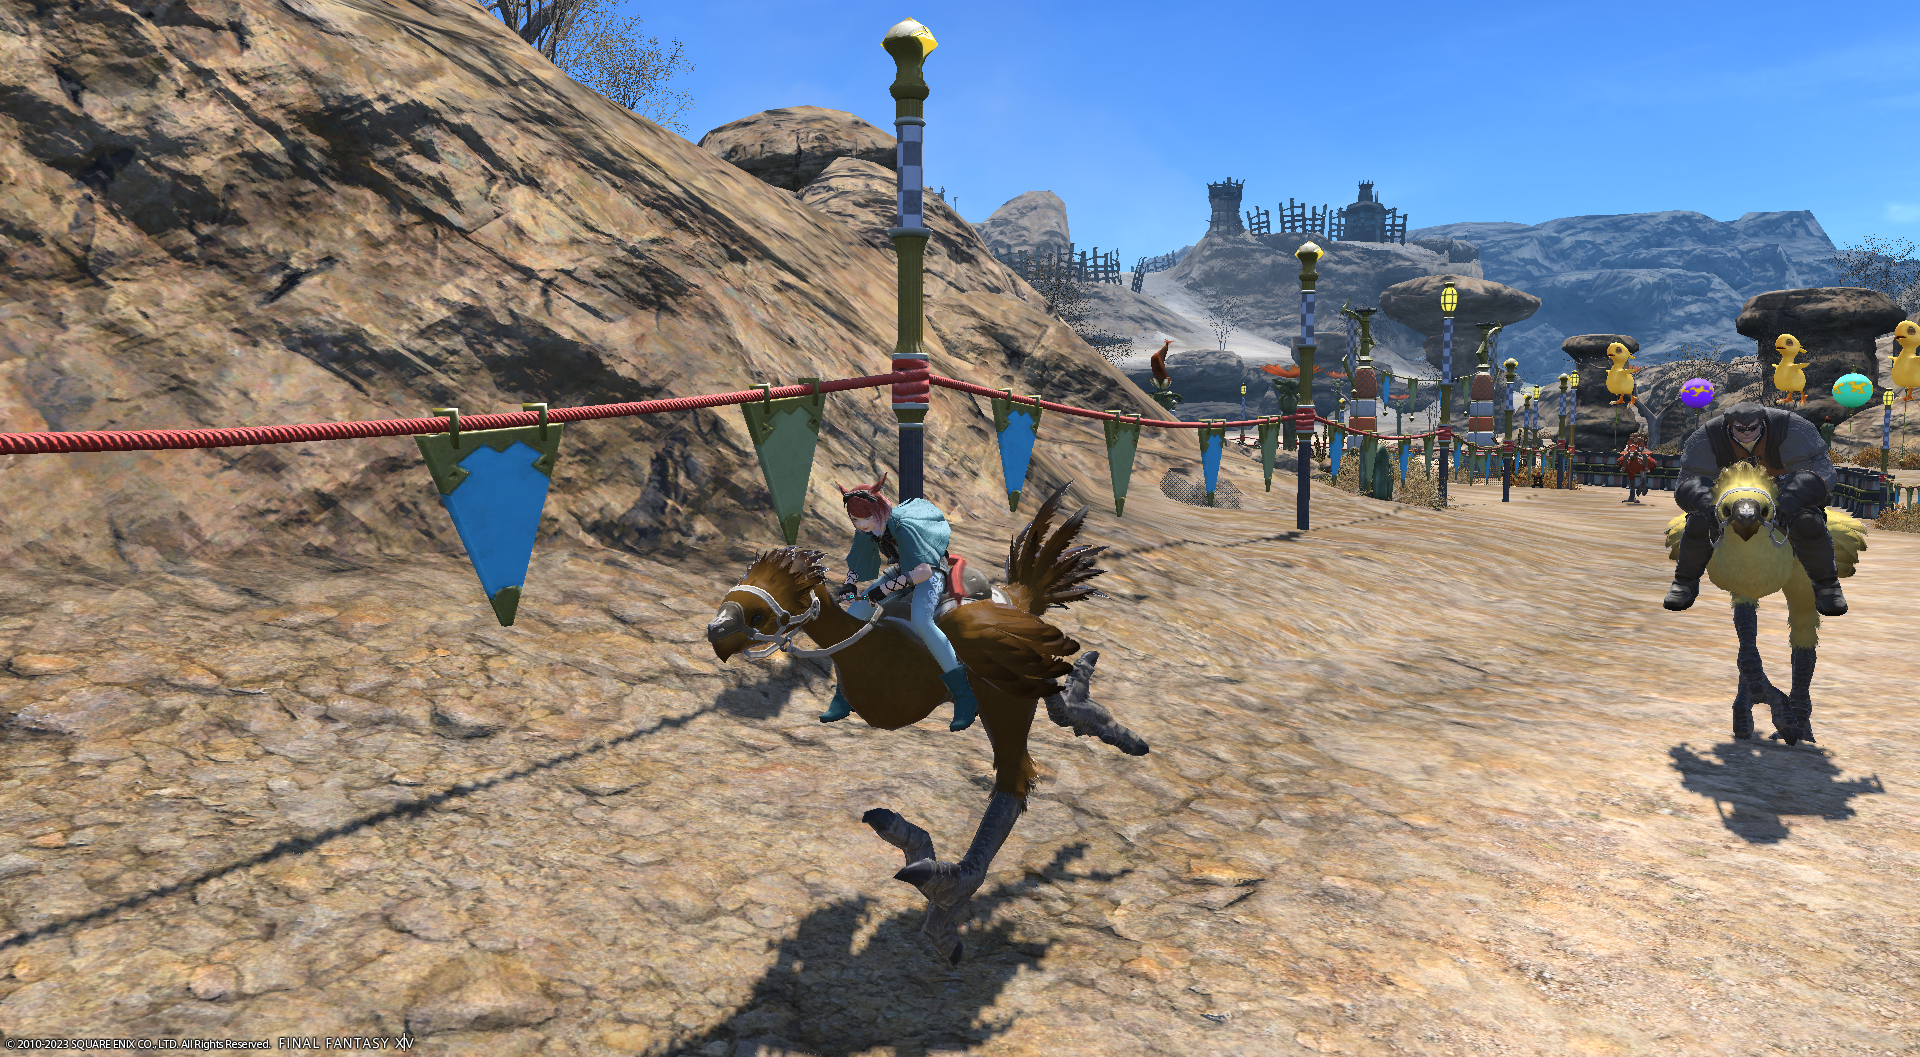 An FFXIV screenshot. A Miqote is riding her chocobo during a chocobo race.